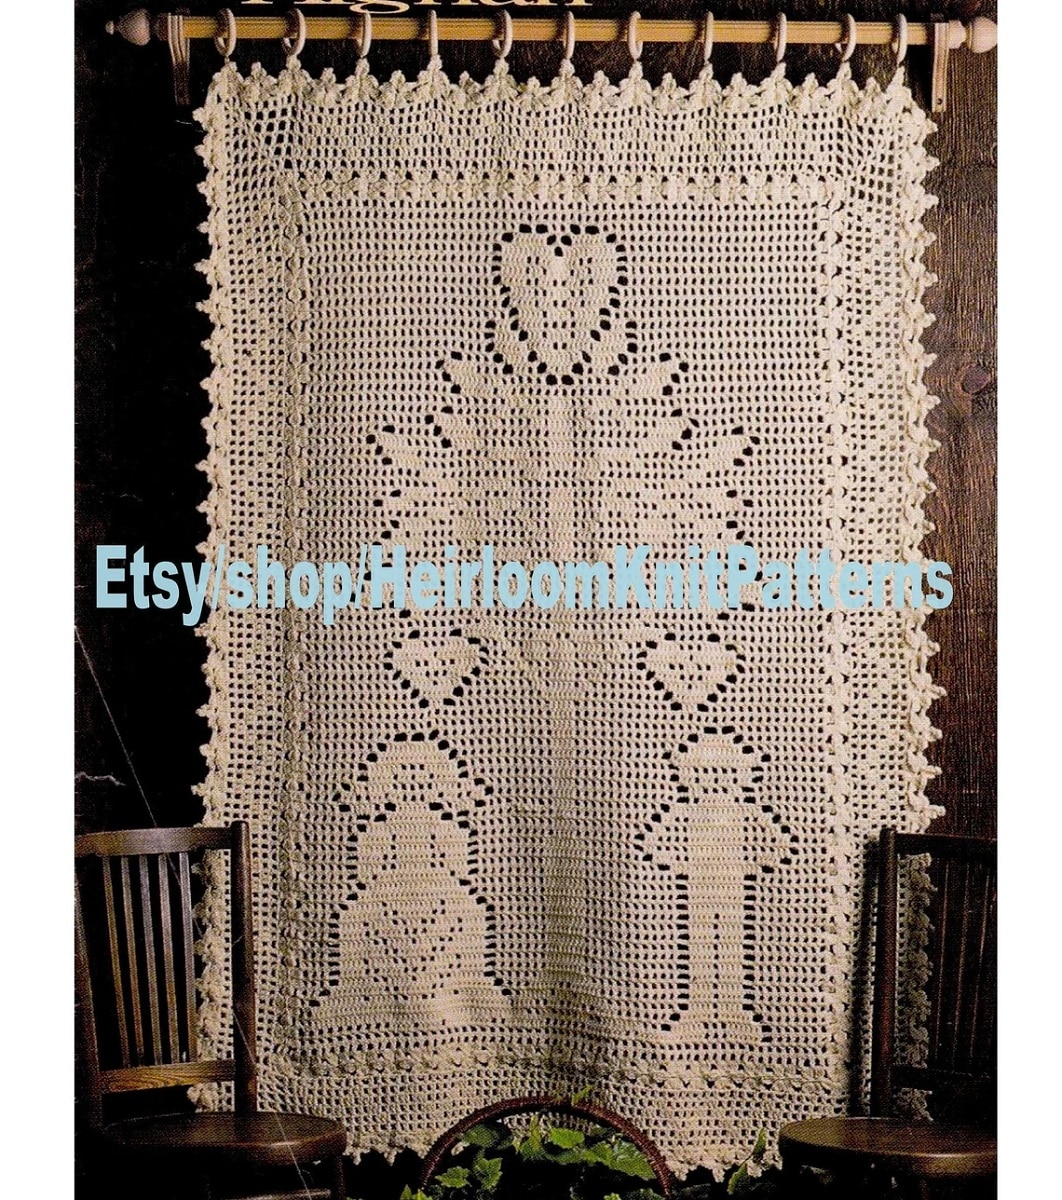 Large cream crochet afghan with a bride and groom standing underneath a tree with a heart on top.